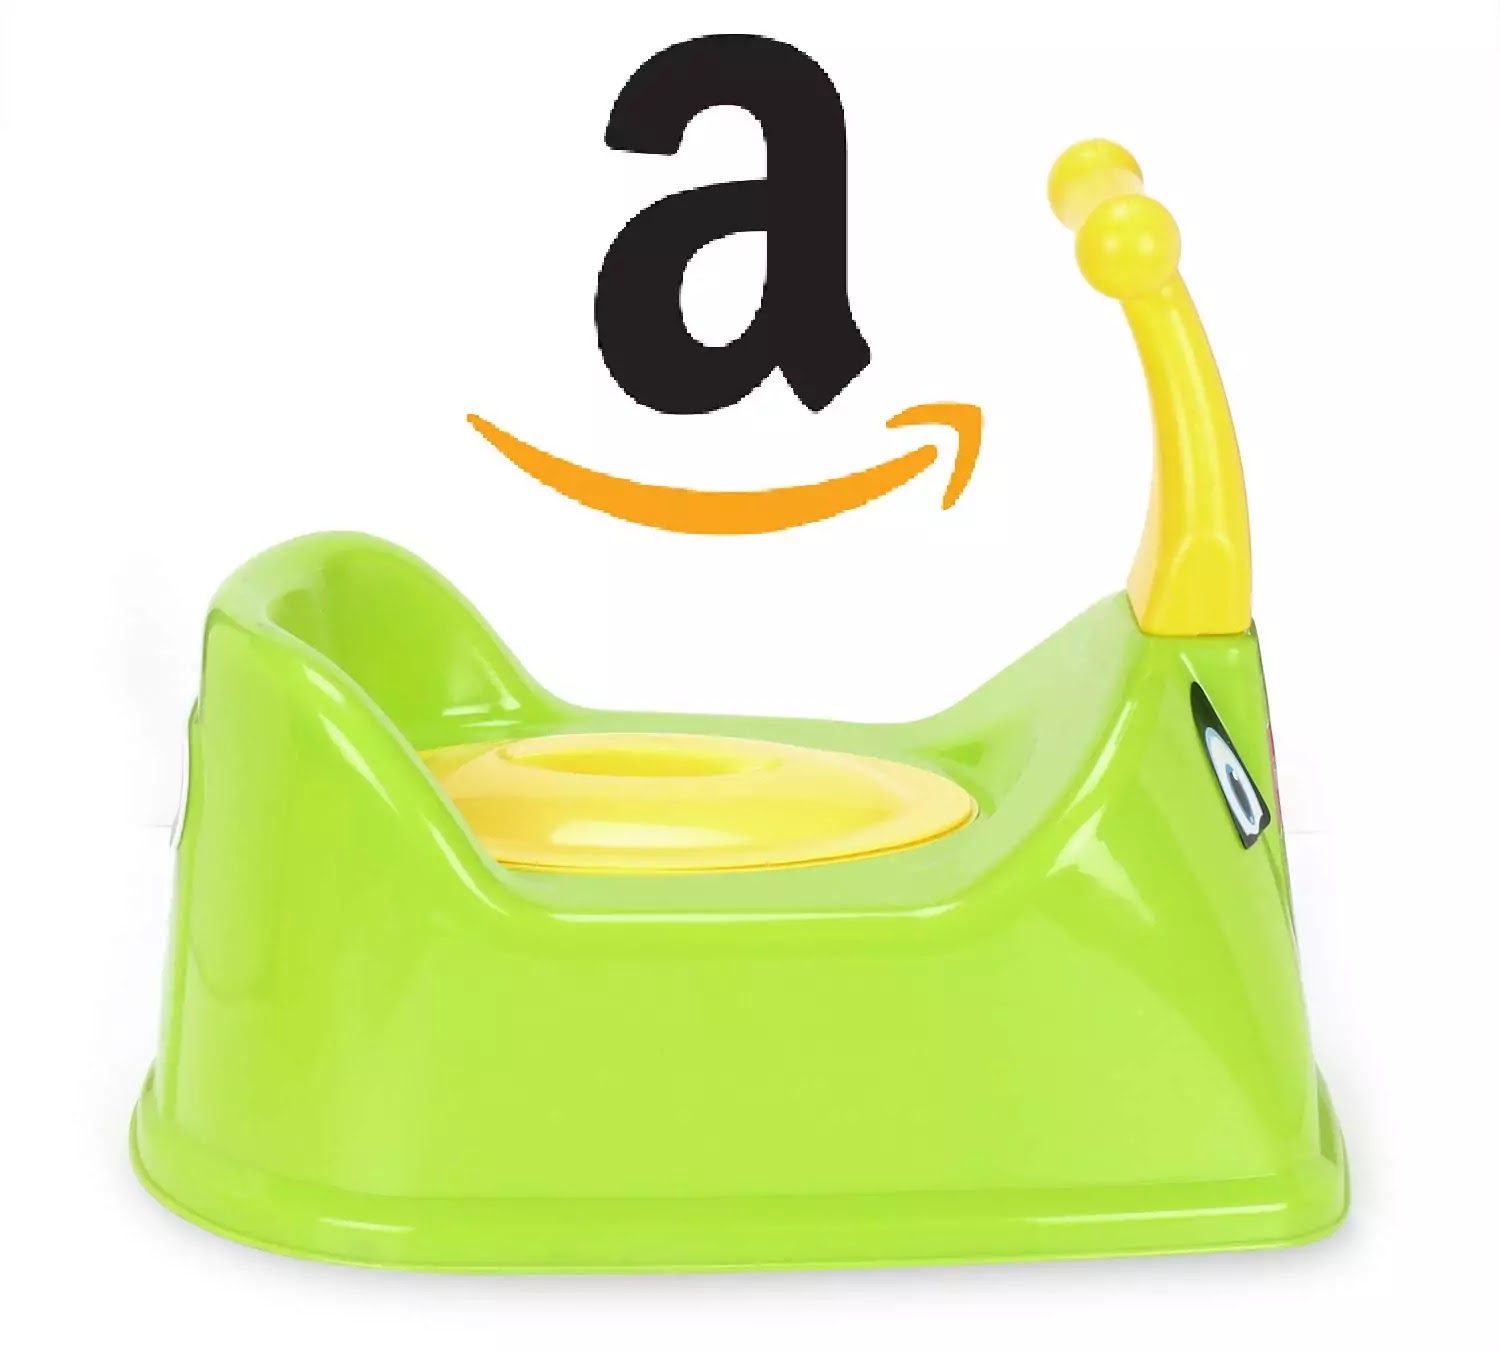 Best Baby Potty Seat Under 500 In India